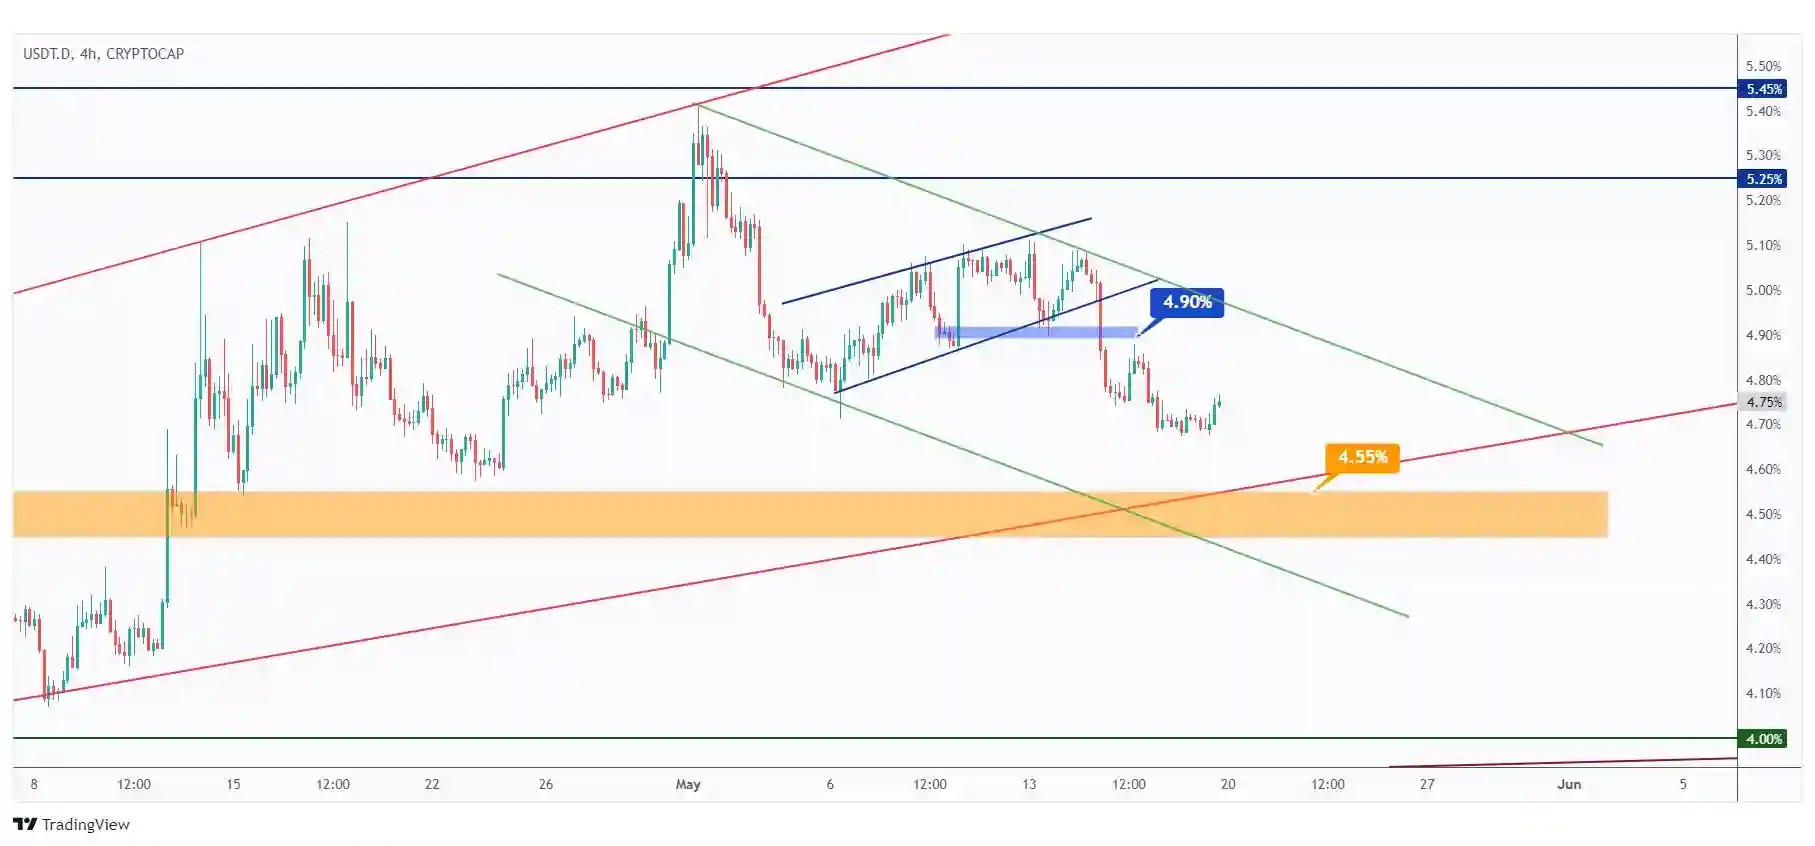 USDT.D 4h chart overall bearish short-term trading within the falling channel especially after breaking below the 4.9% low.